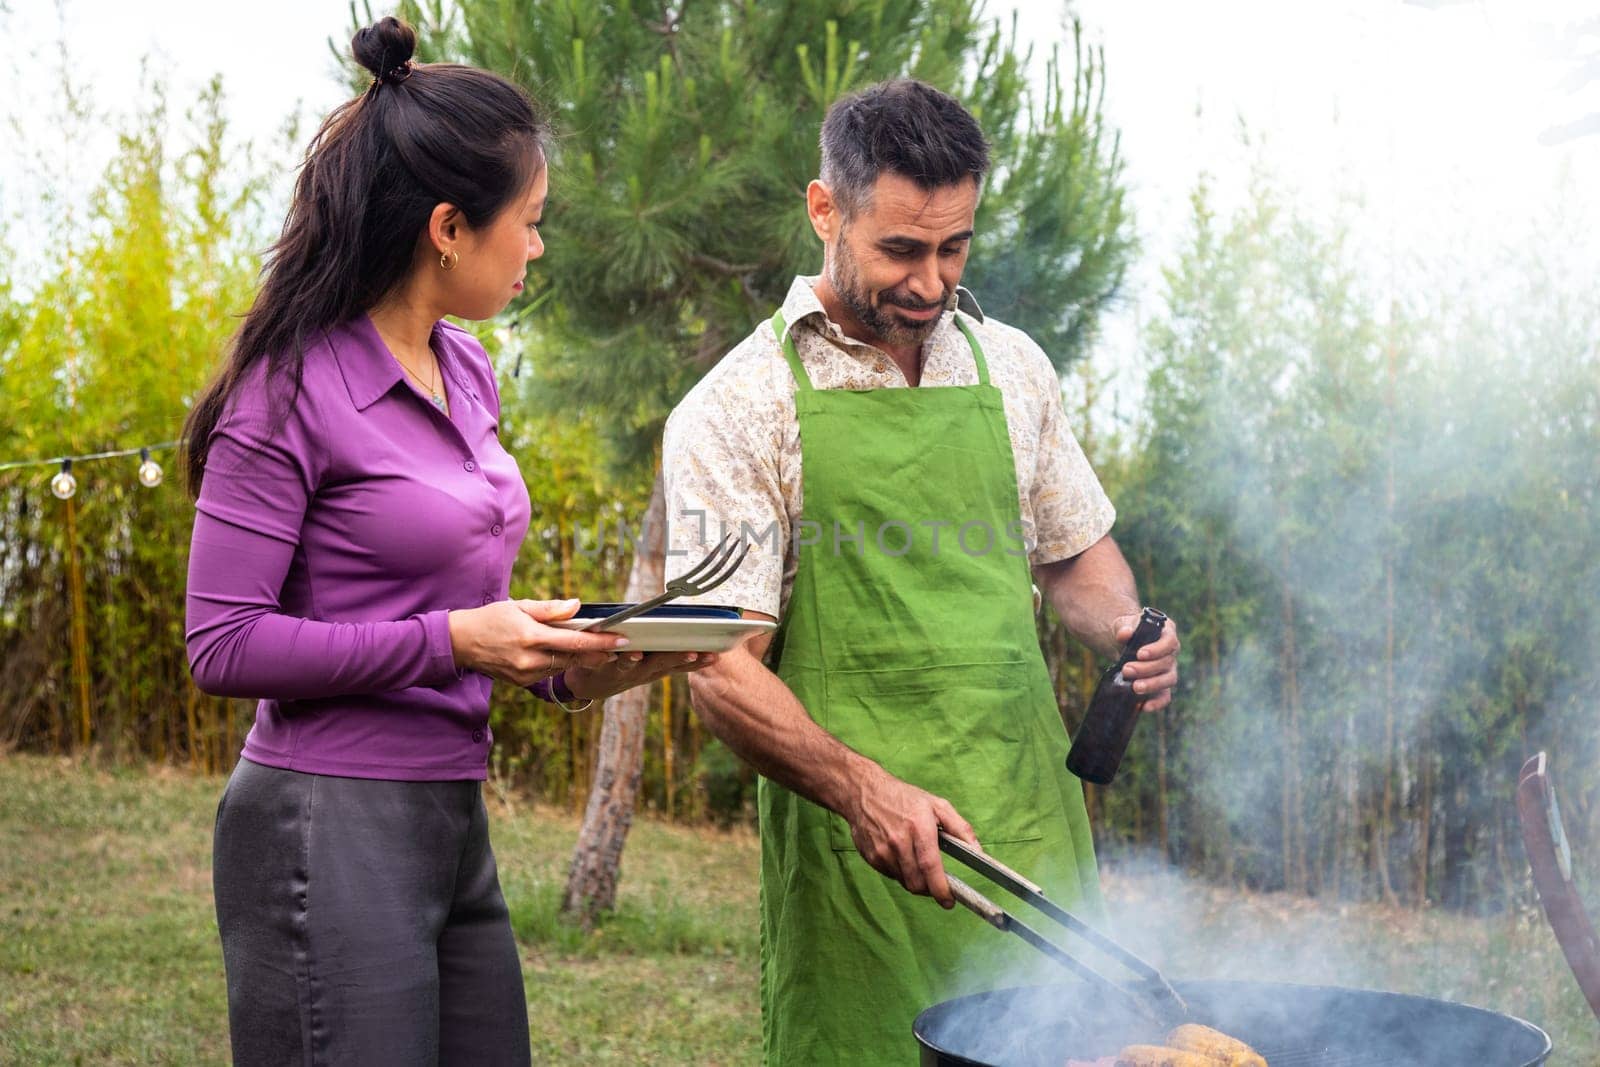 Asian young woman helping caucasian man cook some food on barbecue grill outdoors. Copy space. by Hoverstock